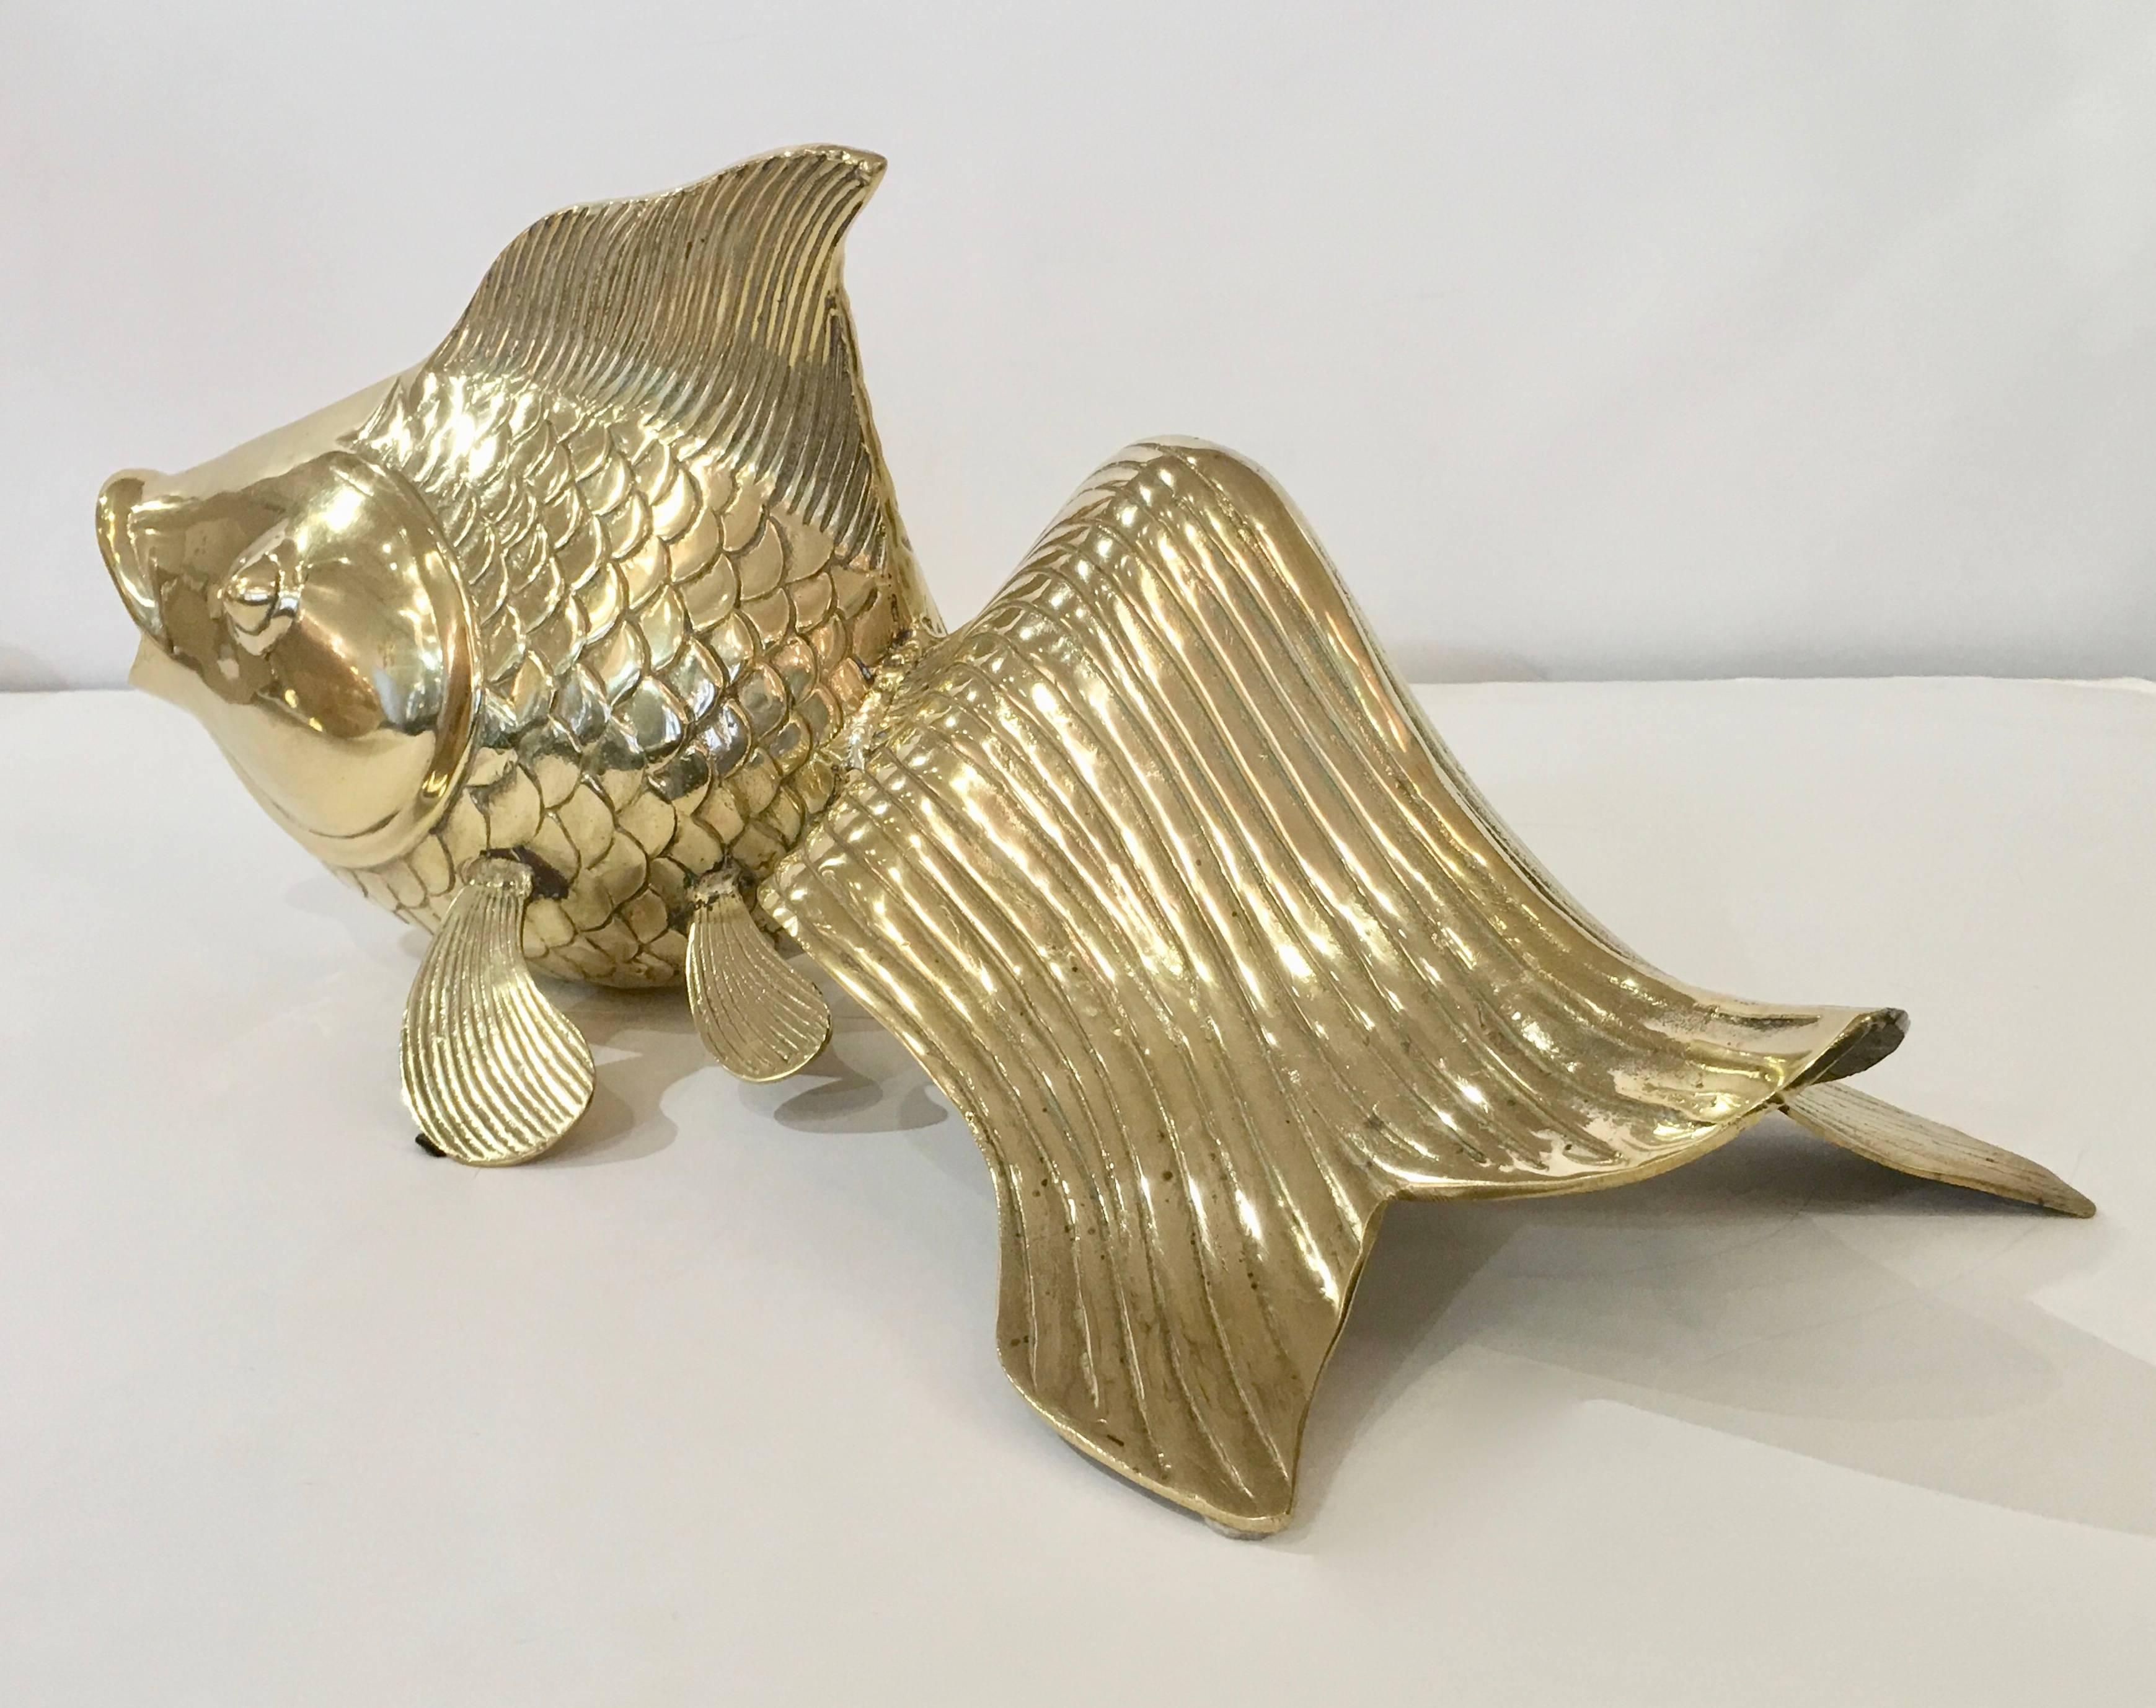 Pair of Monumental Koi Fish in Brass by Rosenthal 1